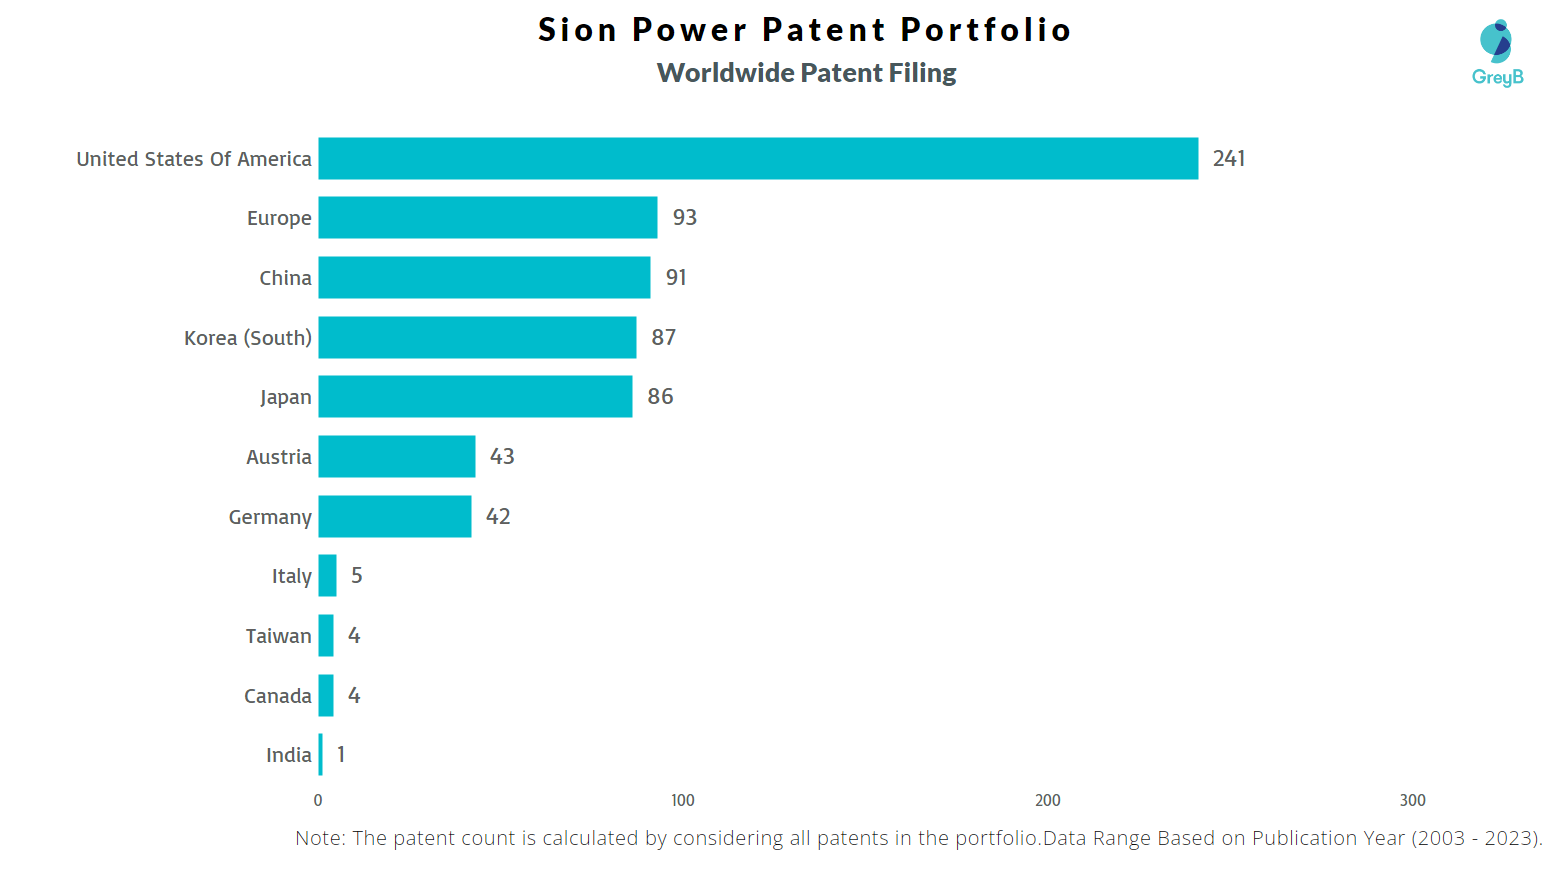 Sion Power Worldwide Patent Filing